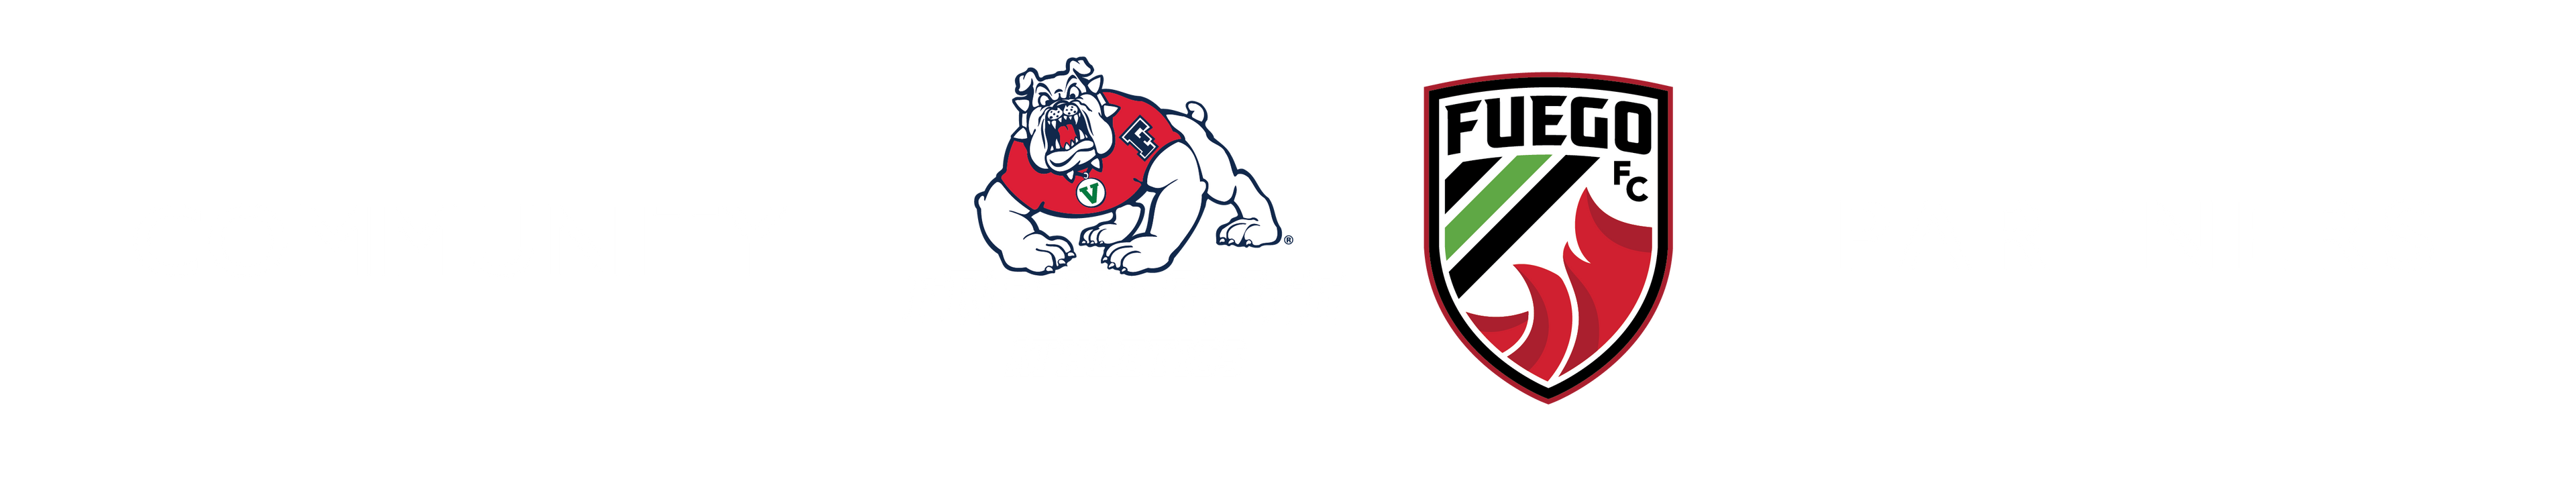 Partnered with Fresno State Bulldogs and Central Valley Fuego